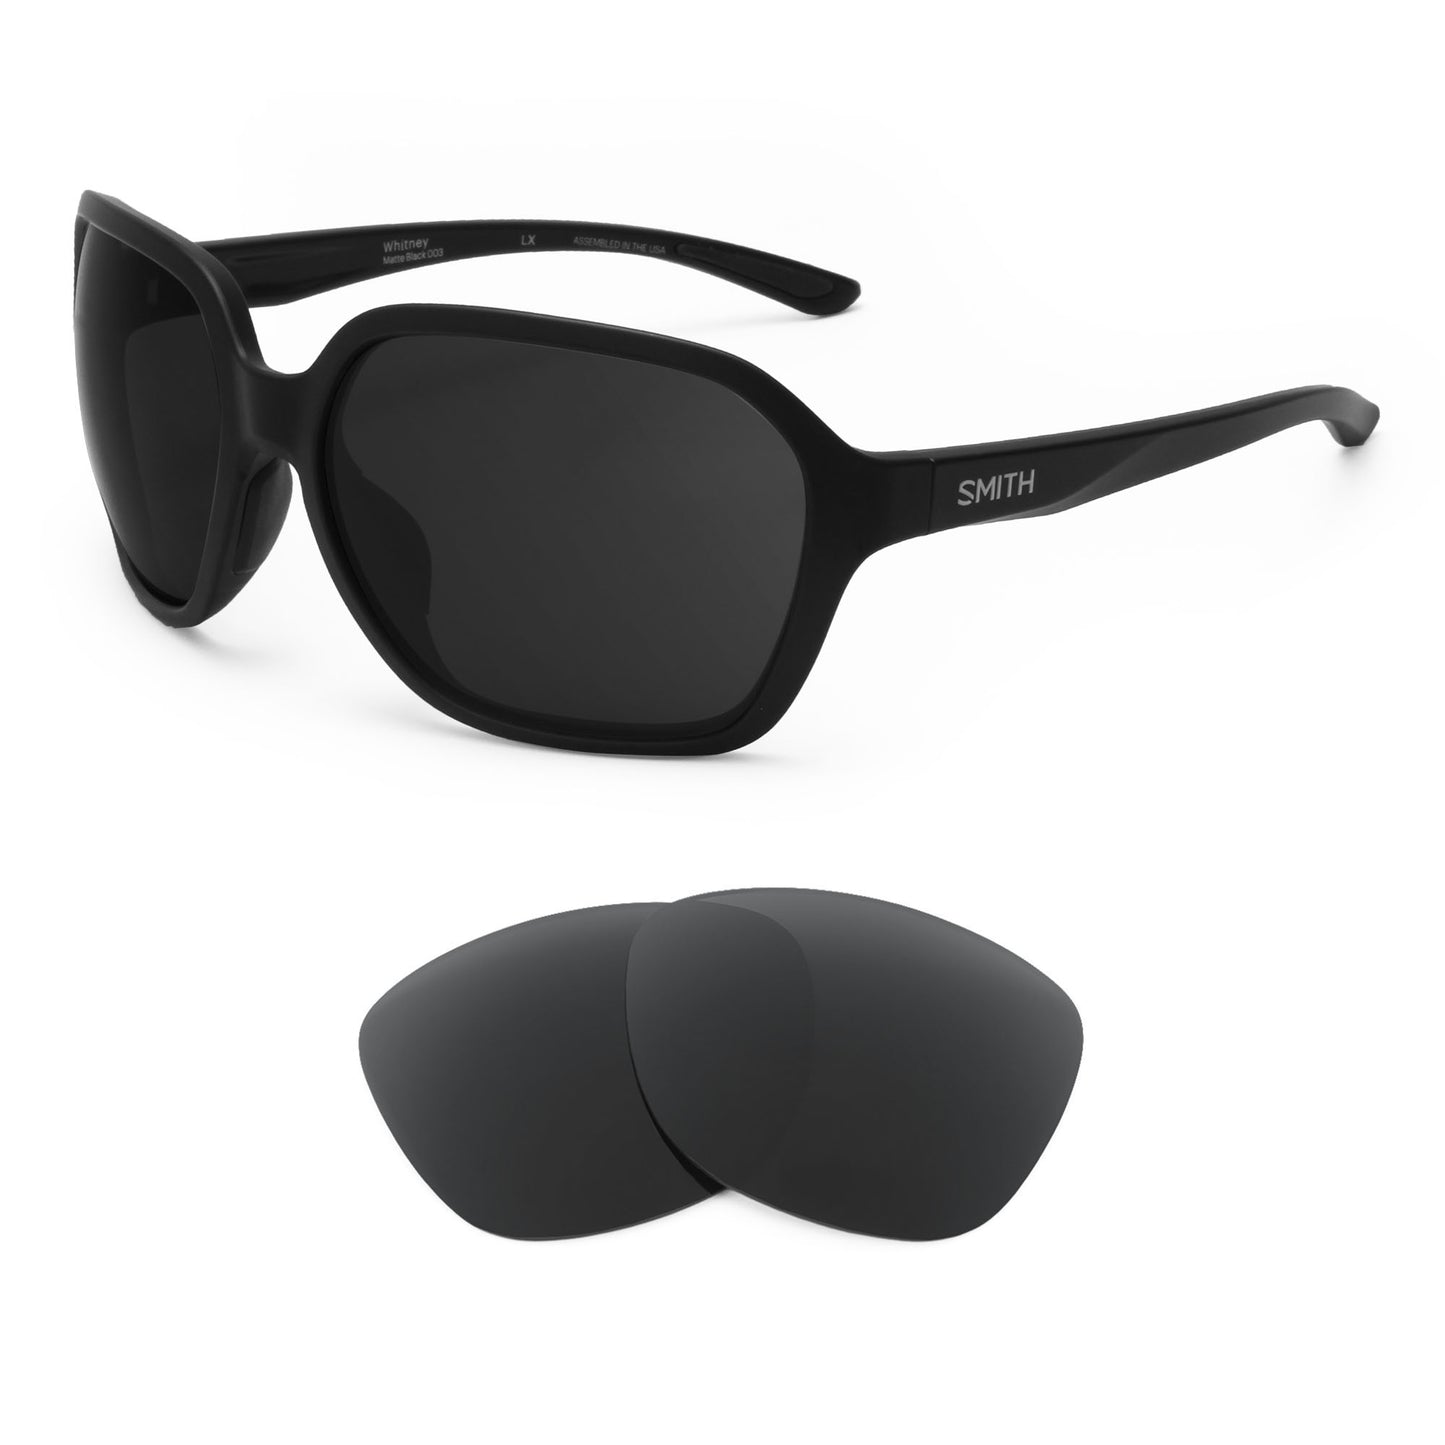 Smith Whitney sunglasses with replacement lenses